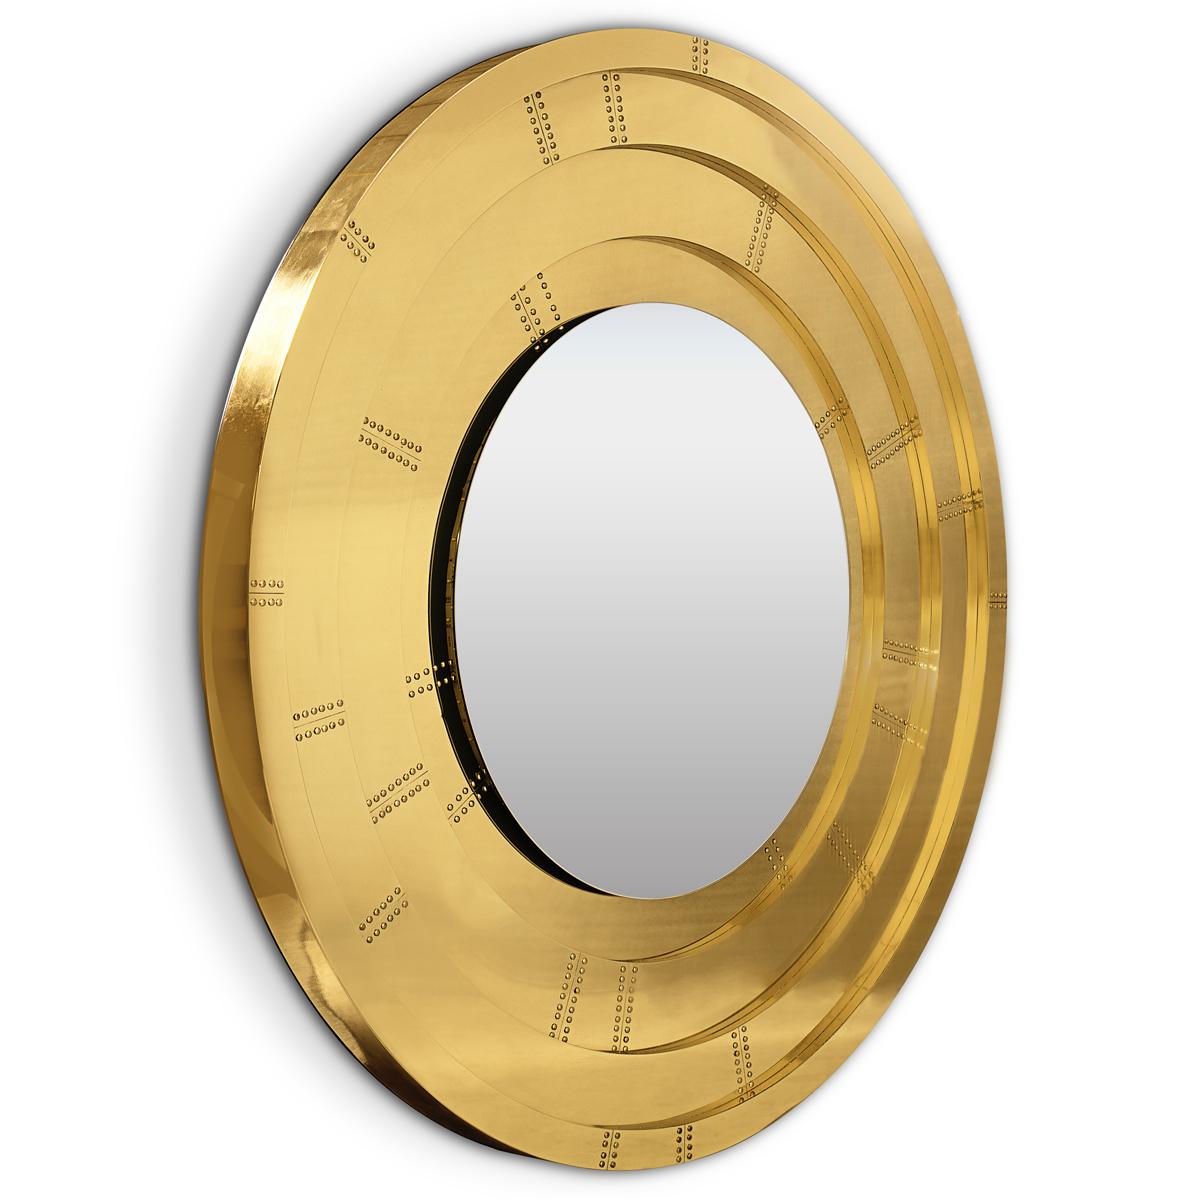 Hand-Crafted Golden Gate Mirror with Solid Polished Brass For Sale